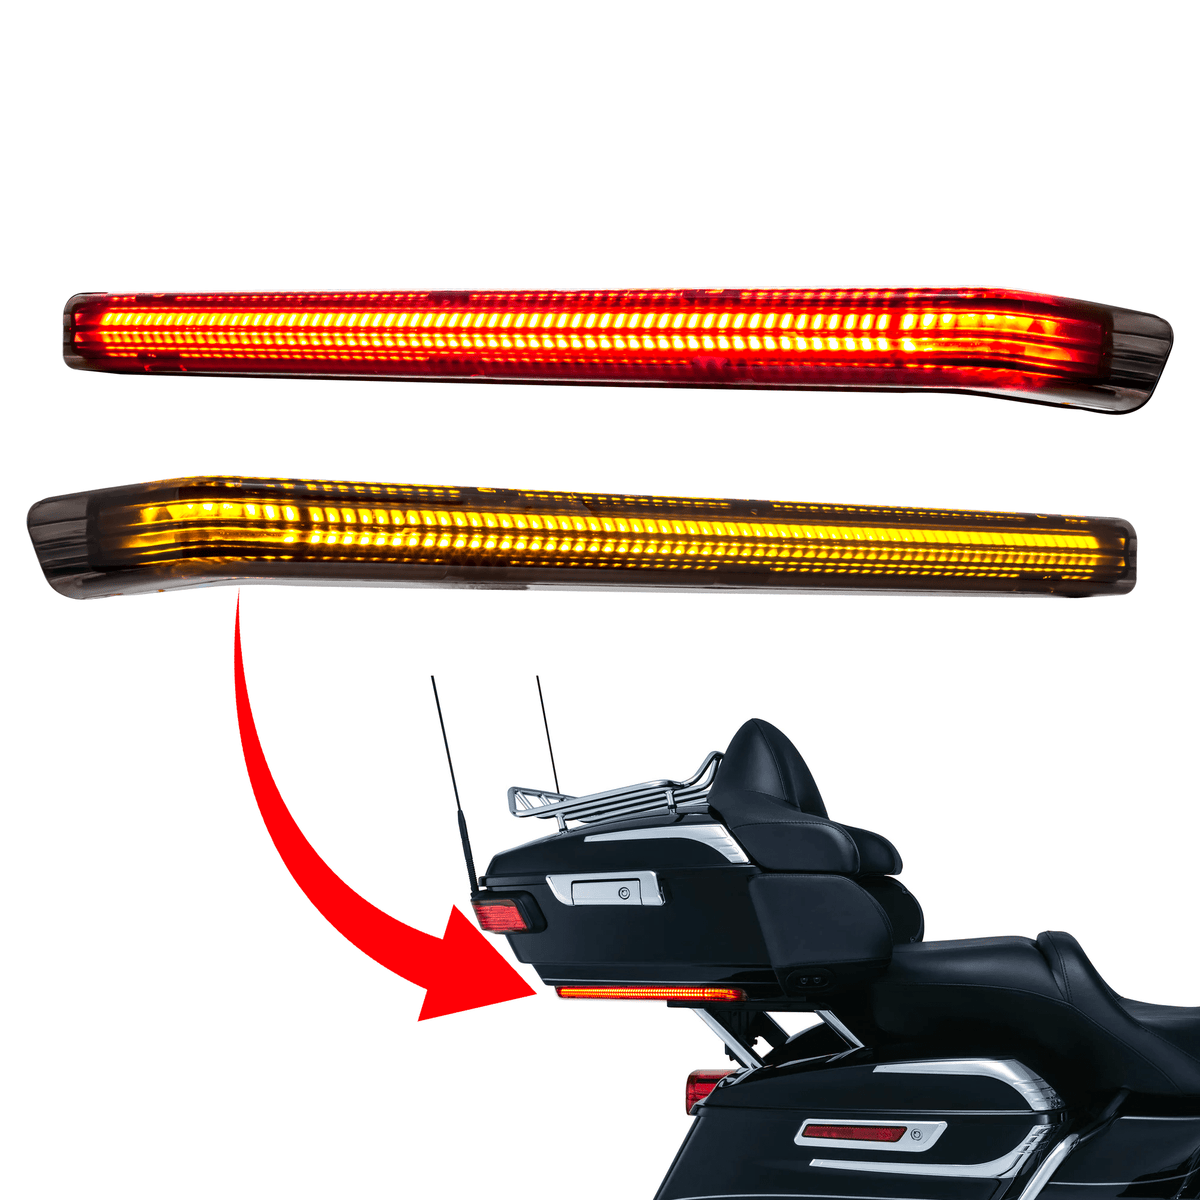 Eagle Lights Tour Pak Auxiliary LED Brake, Tail and Turn Signal Lights for Harley Davidson Motorcycles